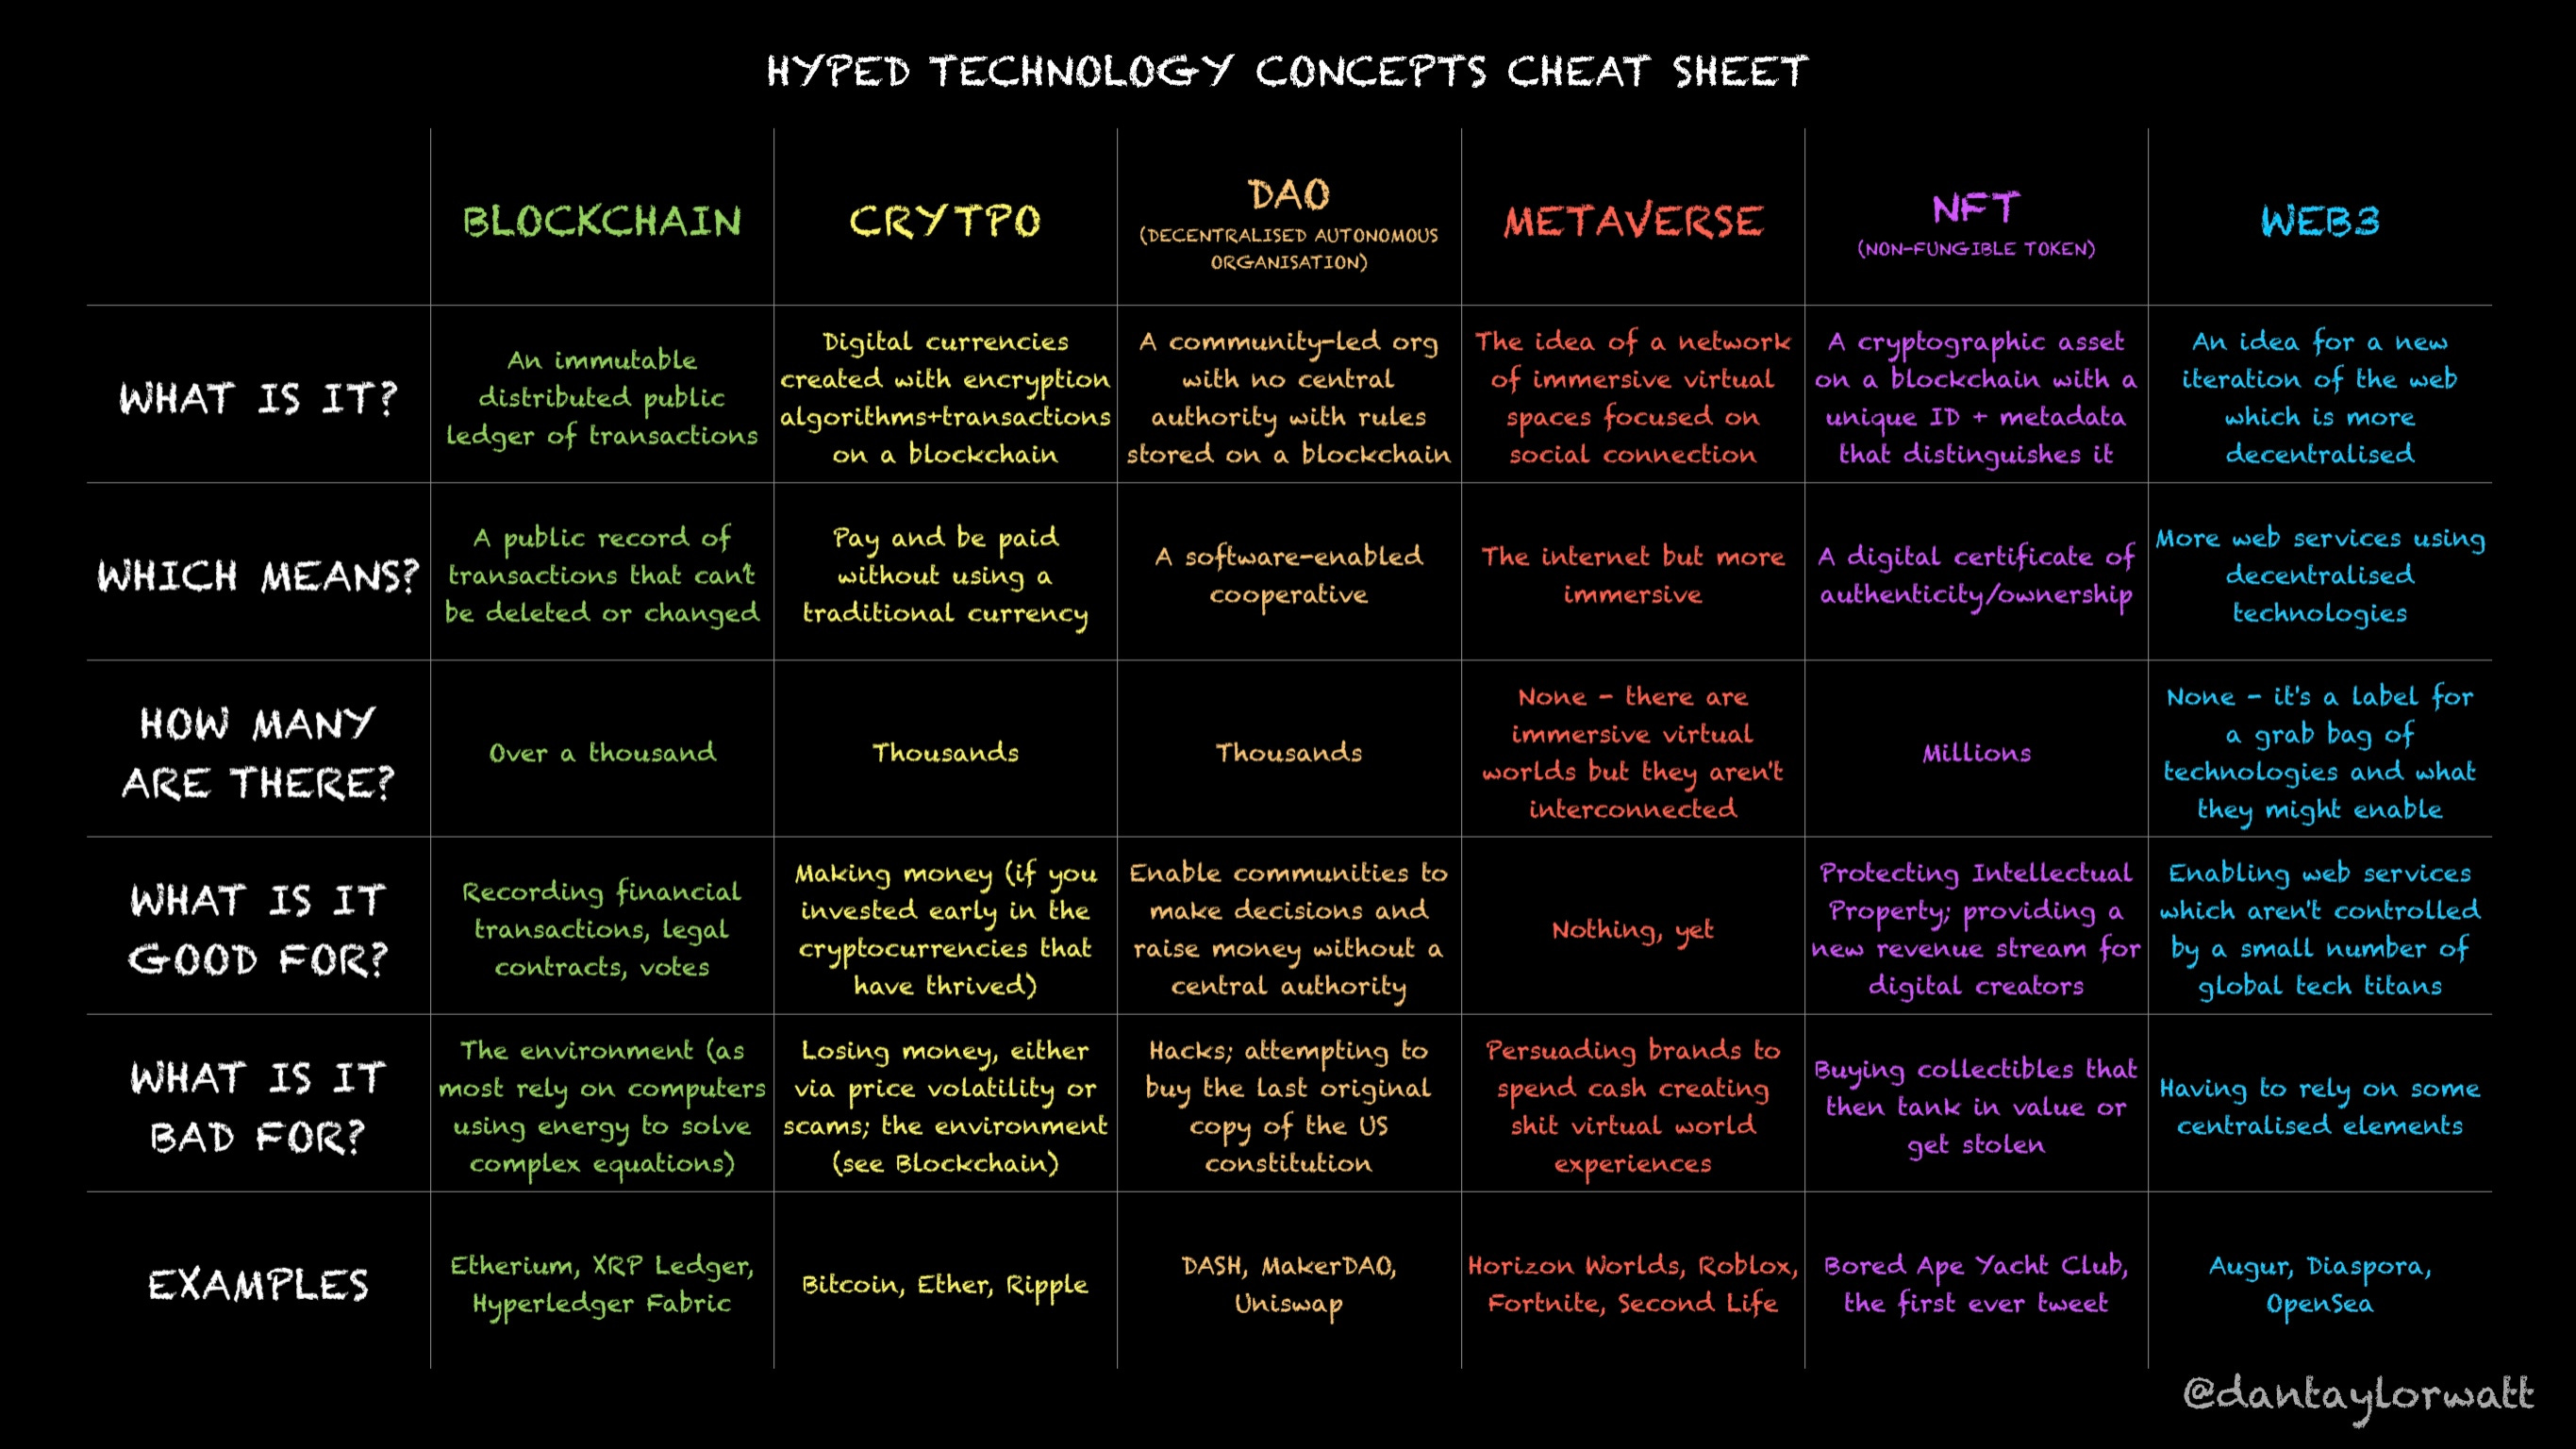 Hyped Technology Concepts Cheat Sheet